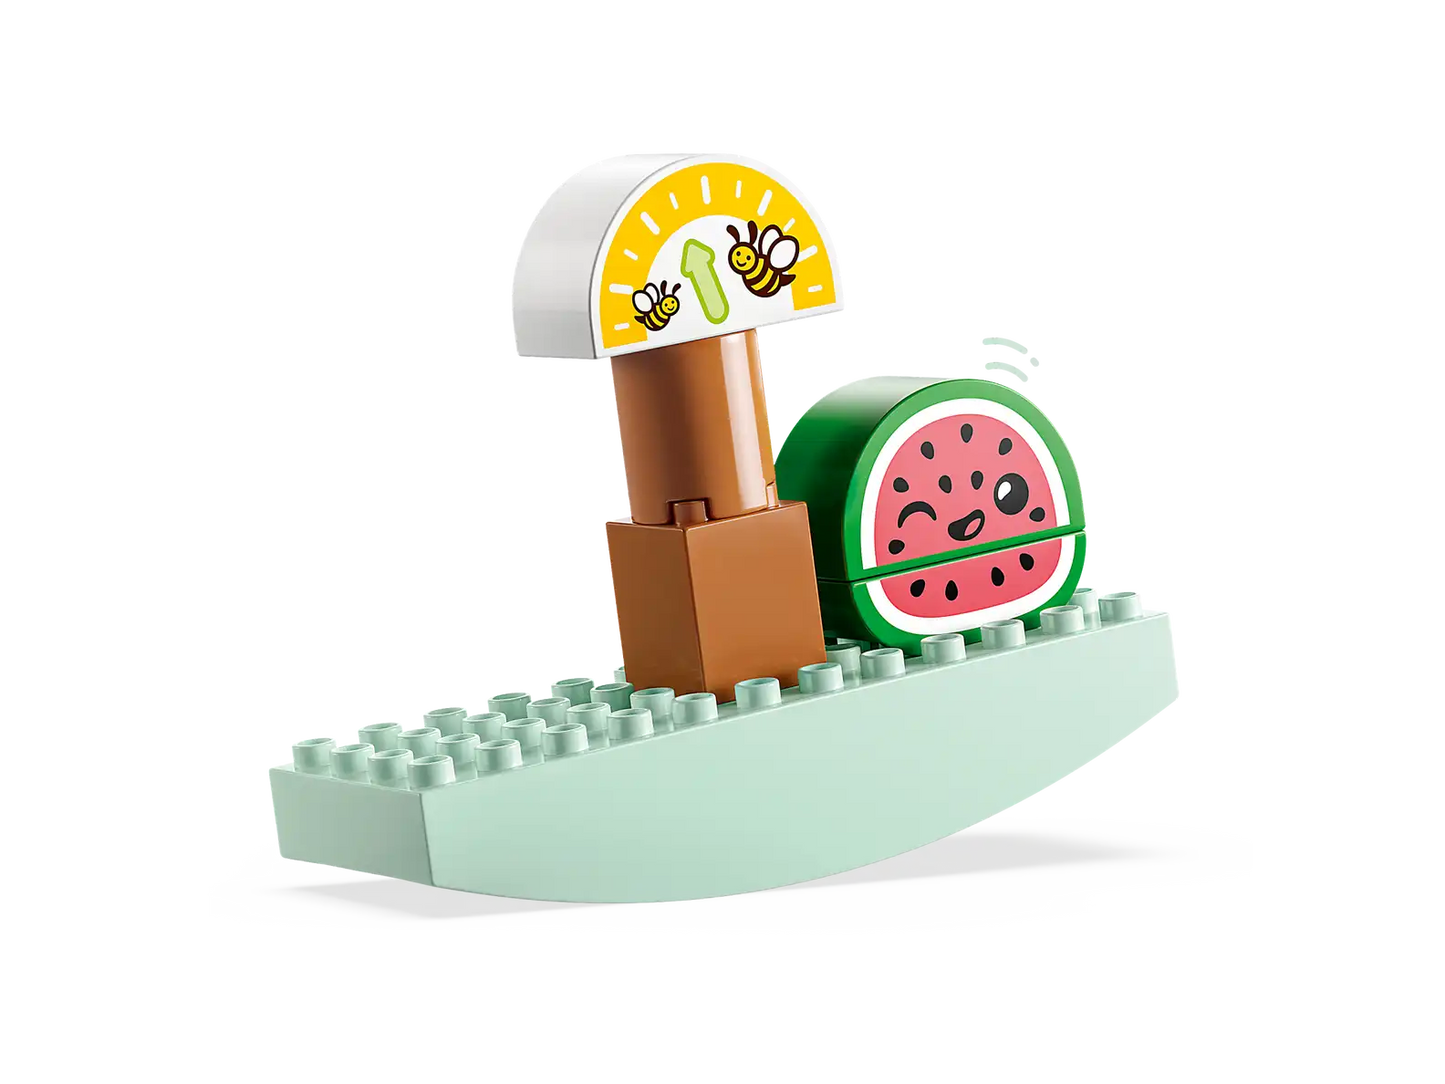 Lego Duplo Fruit and Vegetable Tractor